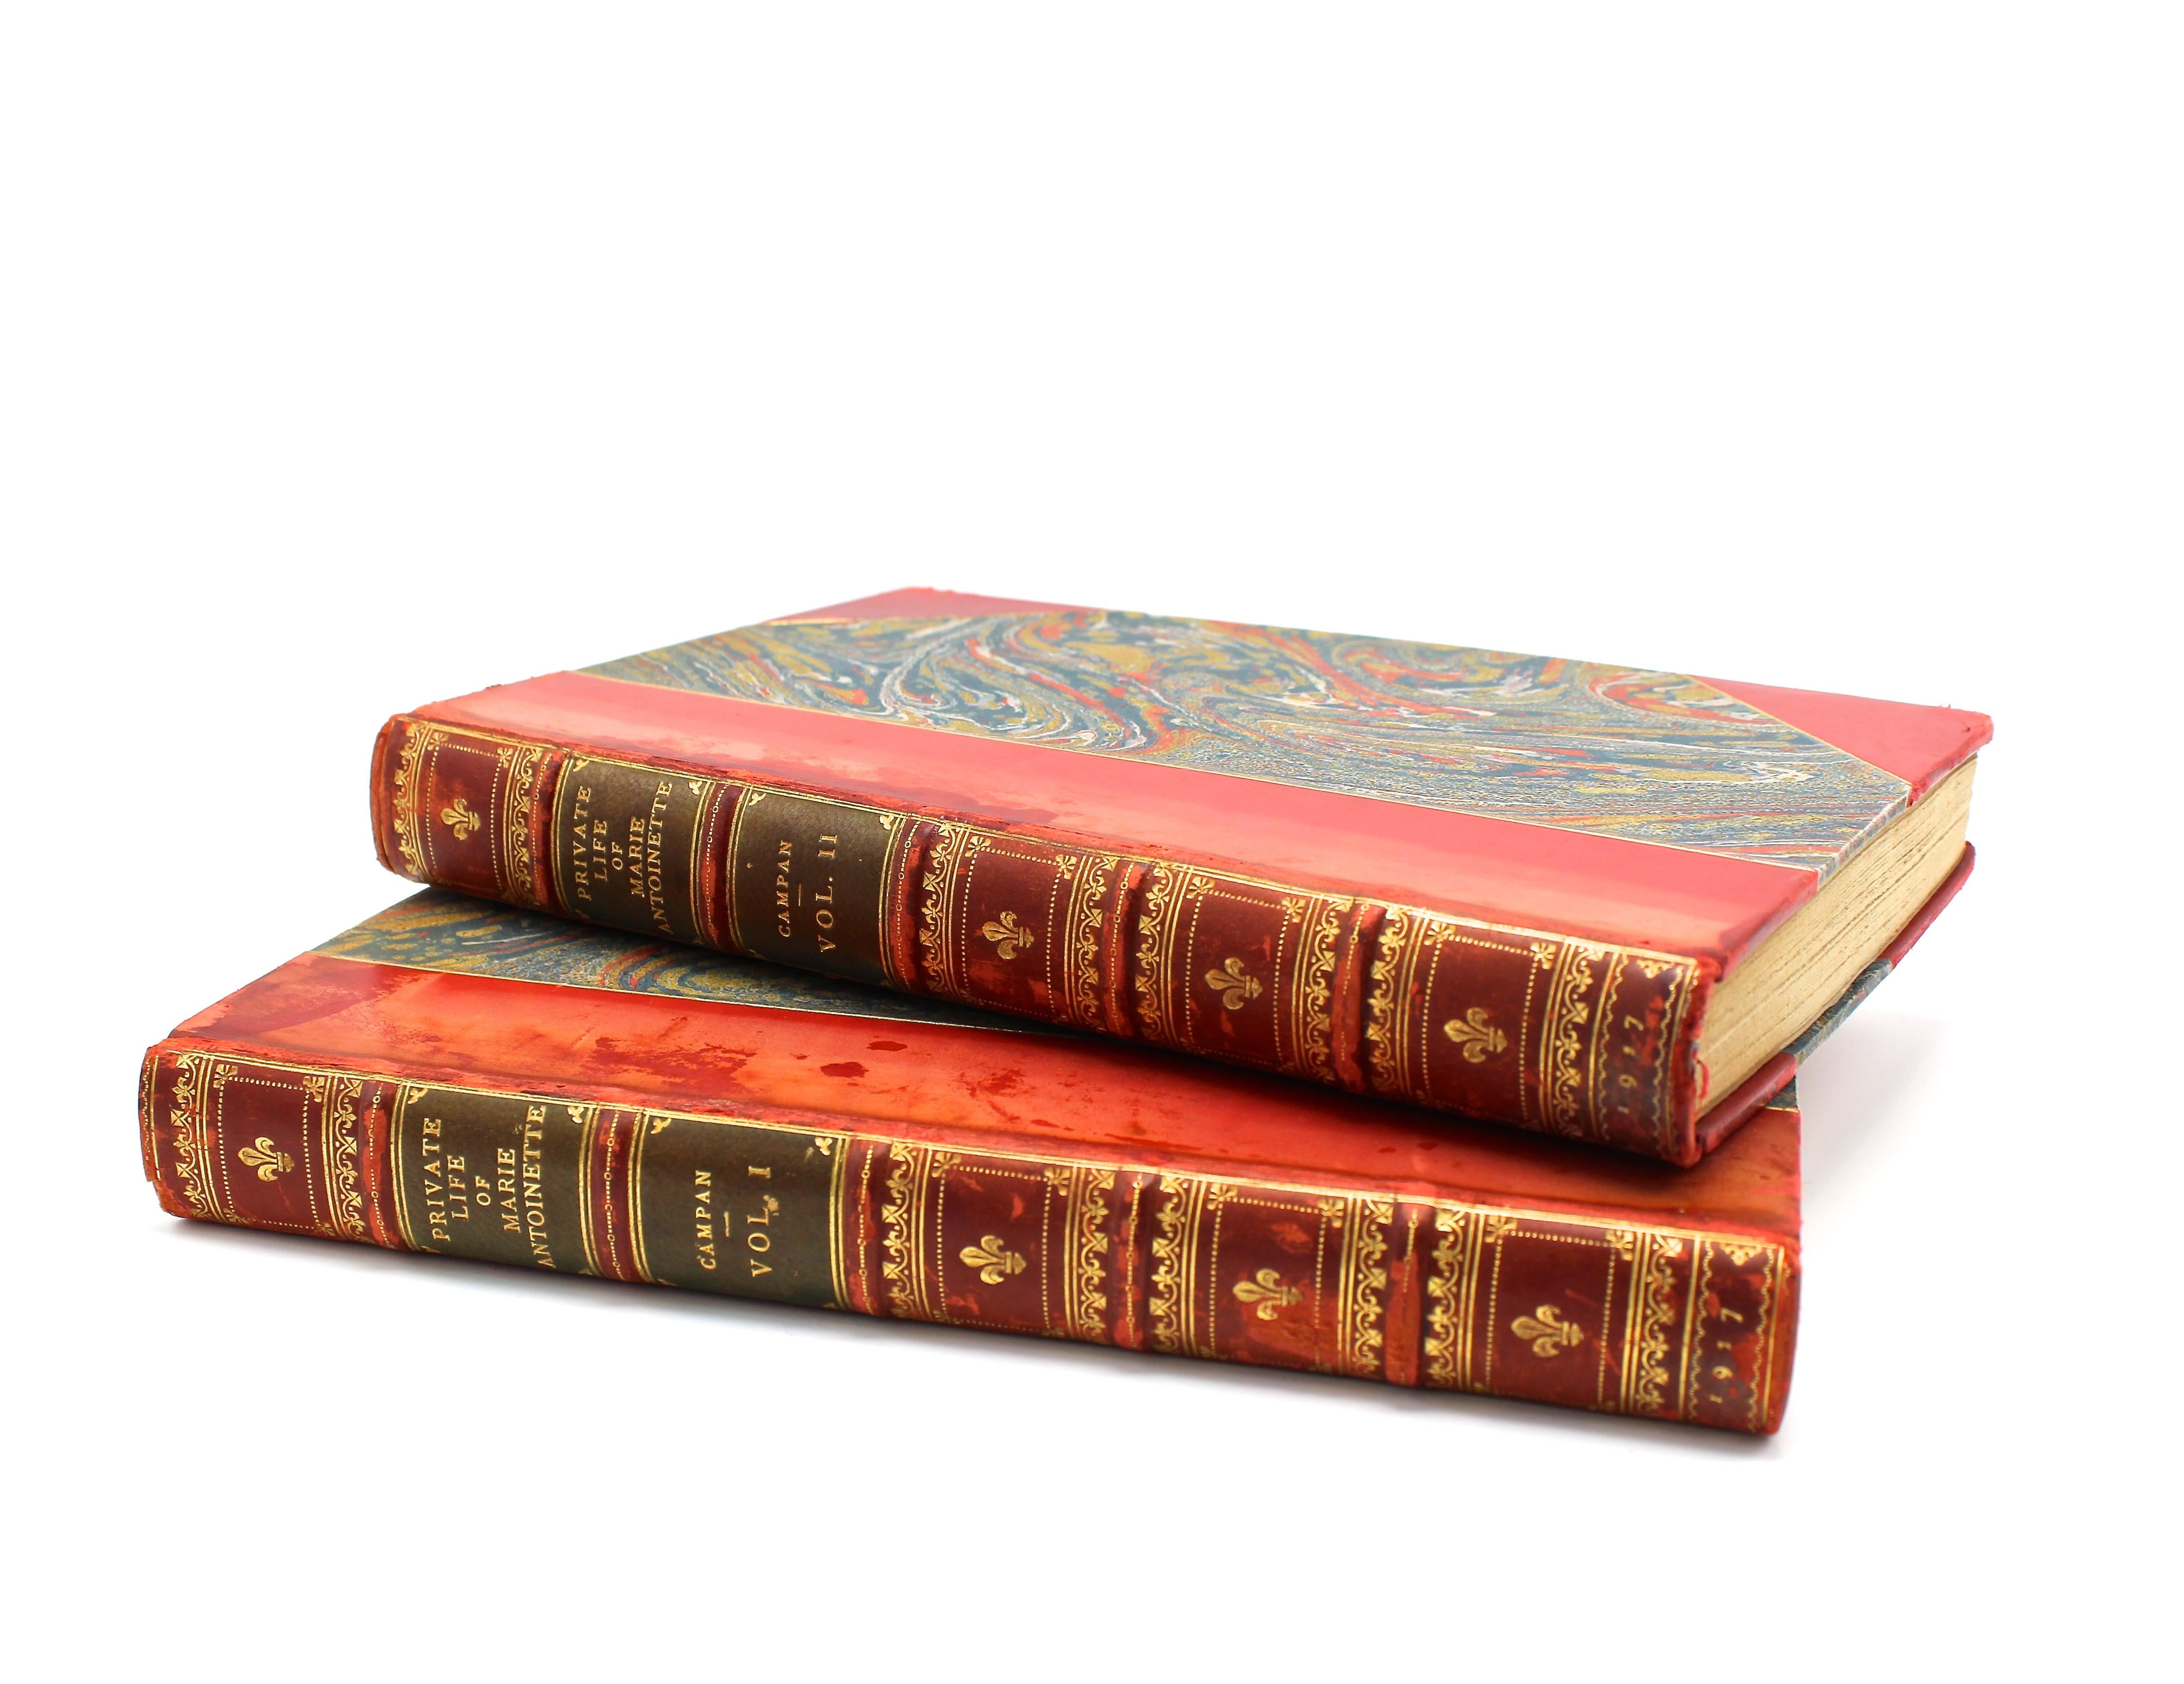 Campan, Jeanne Louise Henriette, Memoirs of the Private Life of Marie Antoinette. New York: Brentano’s Publishers, 1917. Early edition, two volume. Period red leather with marble cloth binding.

This two volume set of Memoirs of the Private Life